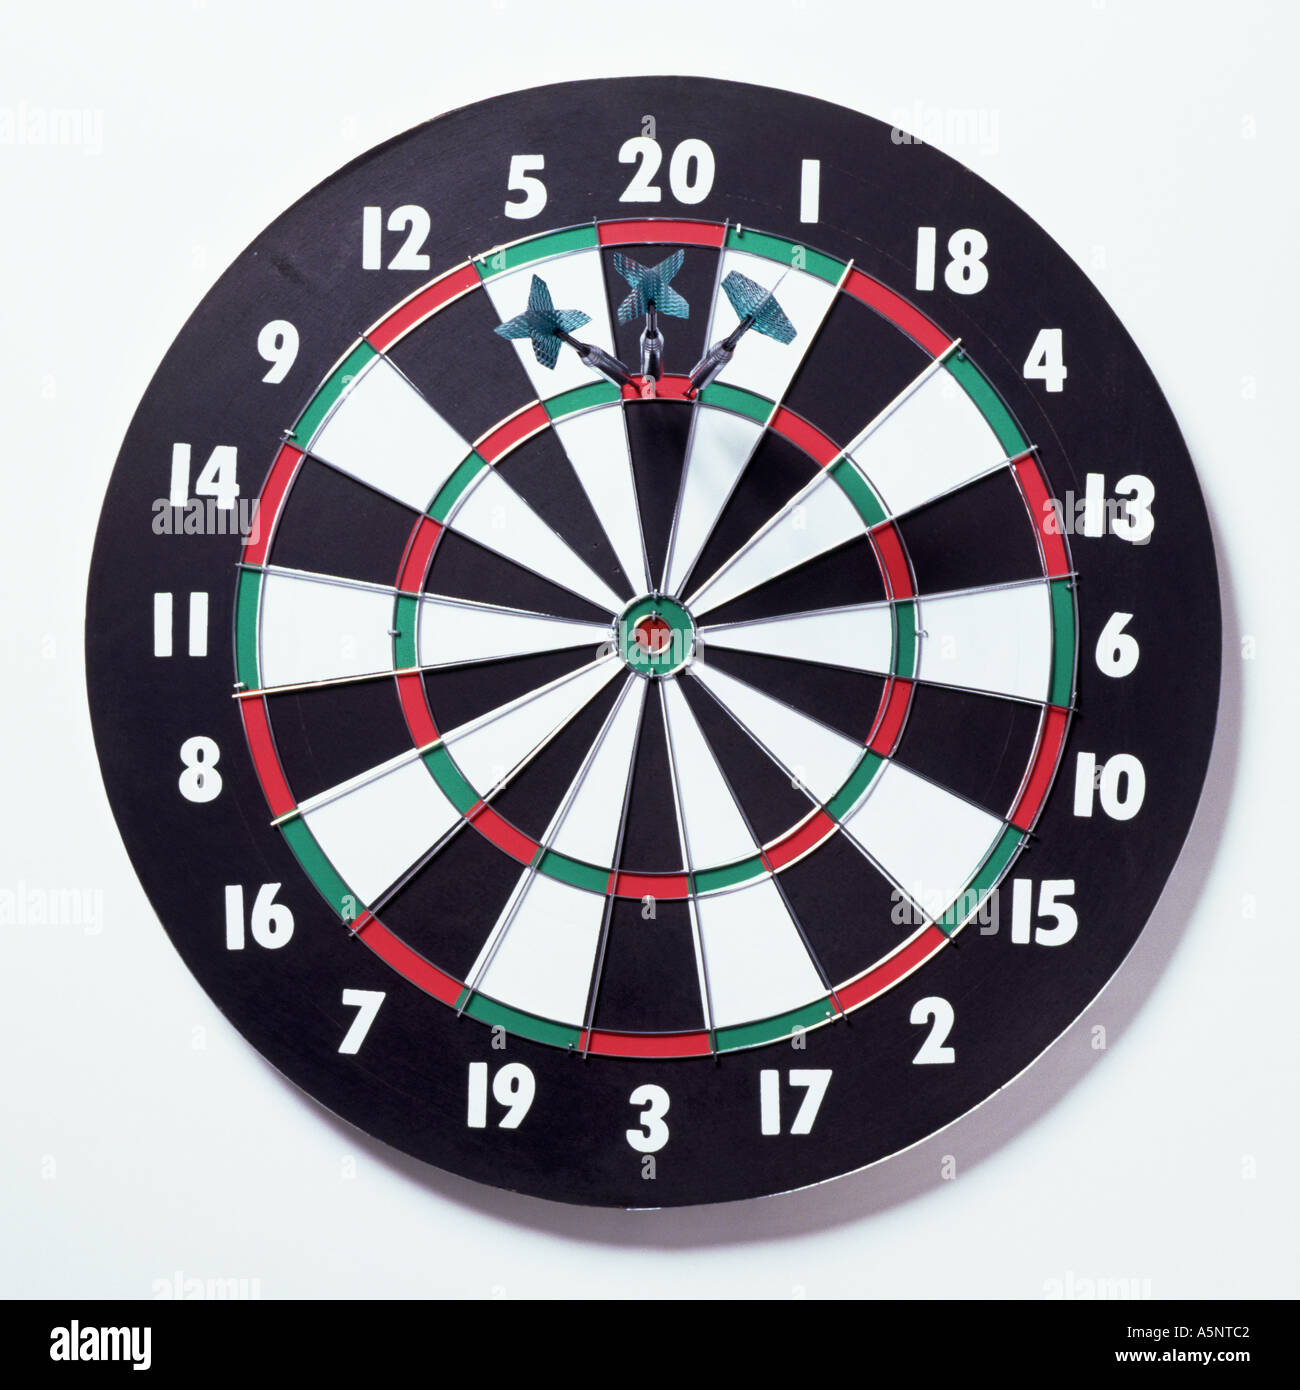 Dart board 180 Stock Photos and Images